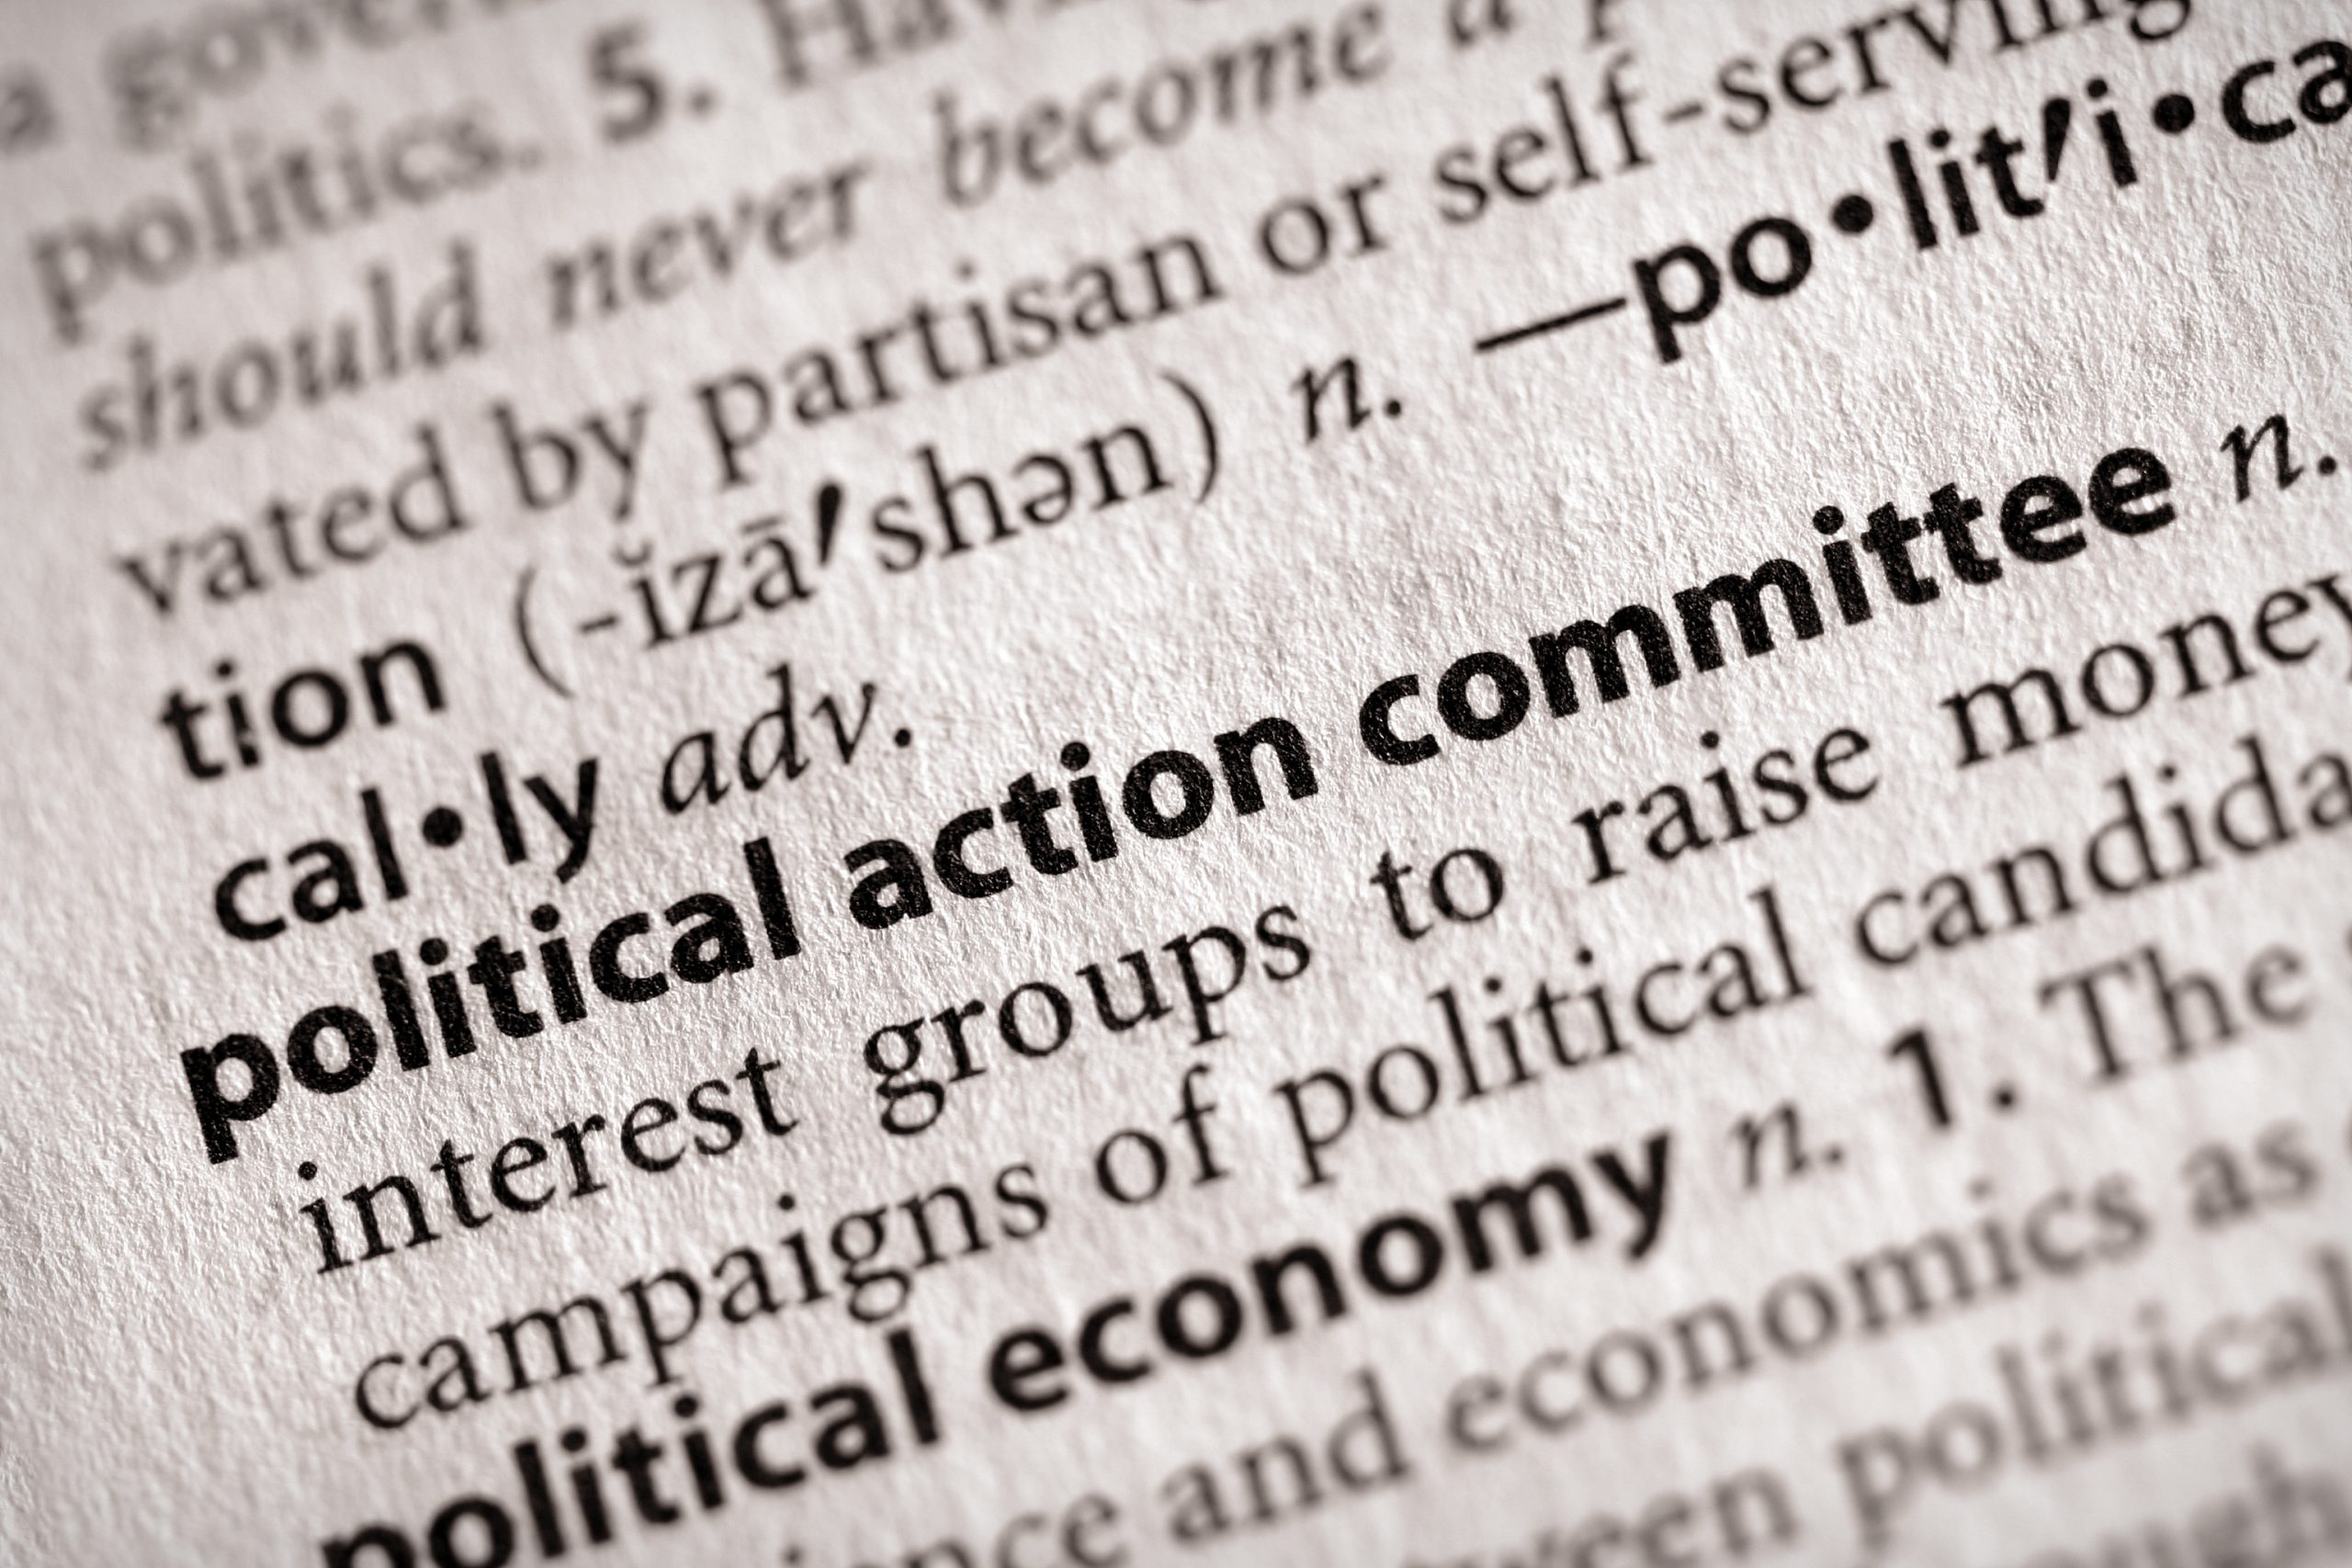 POLITICAL ACTION COMMITTEE